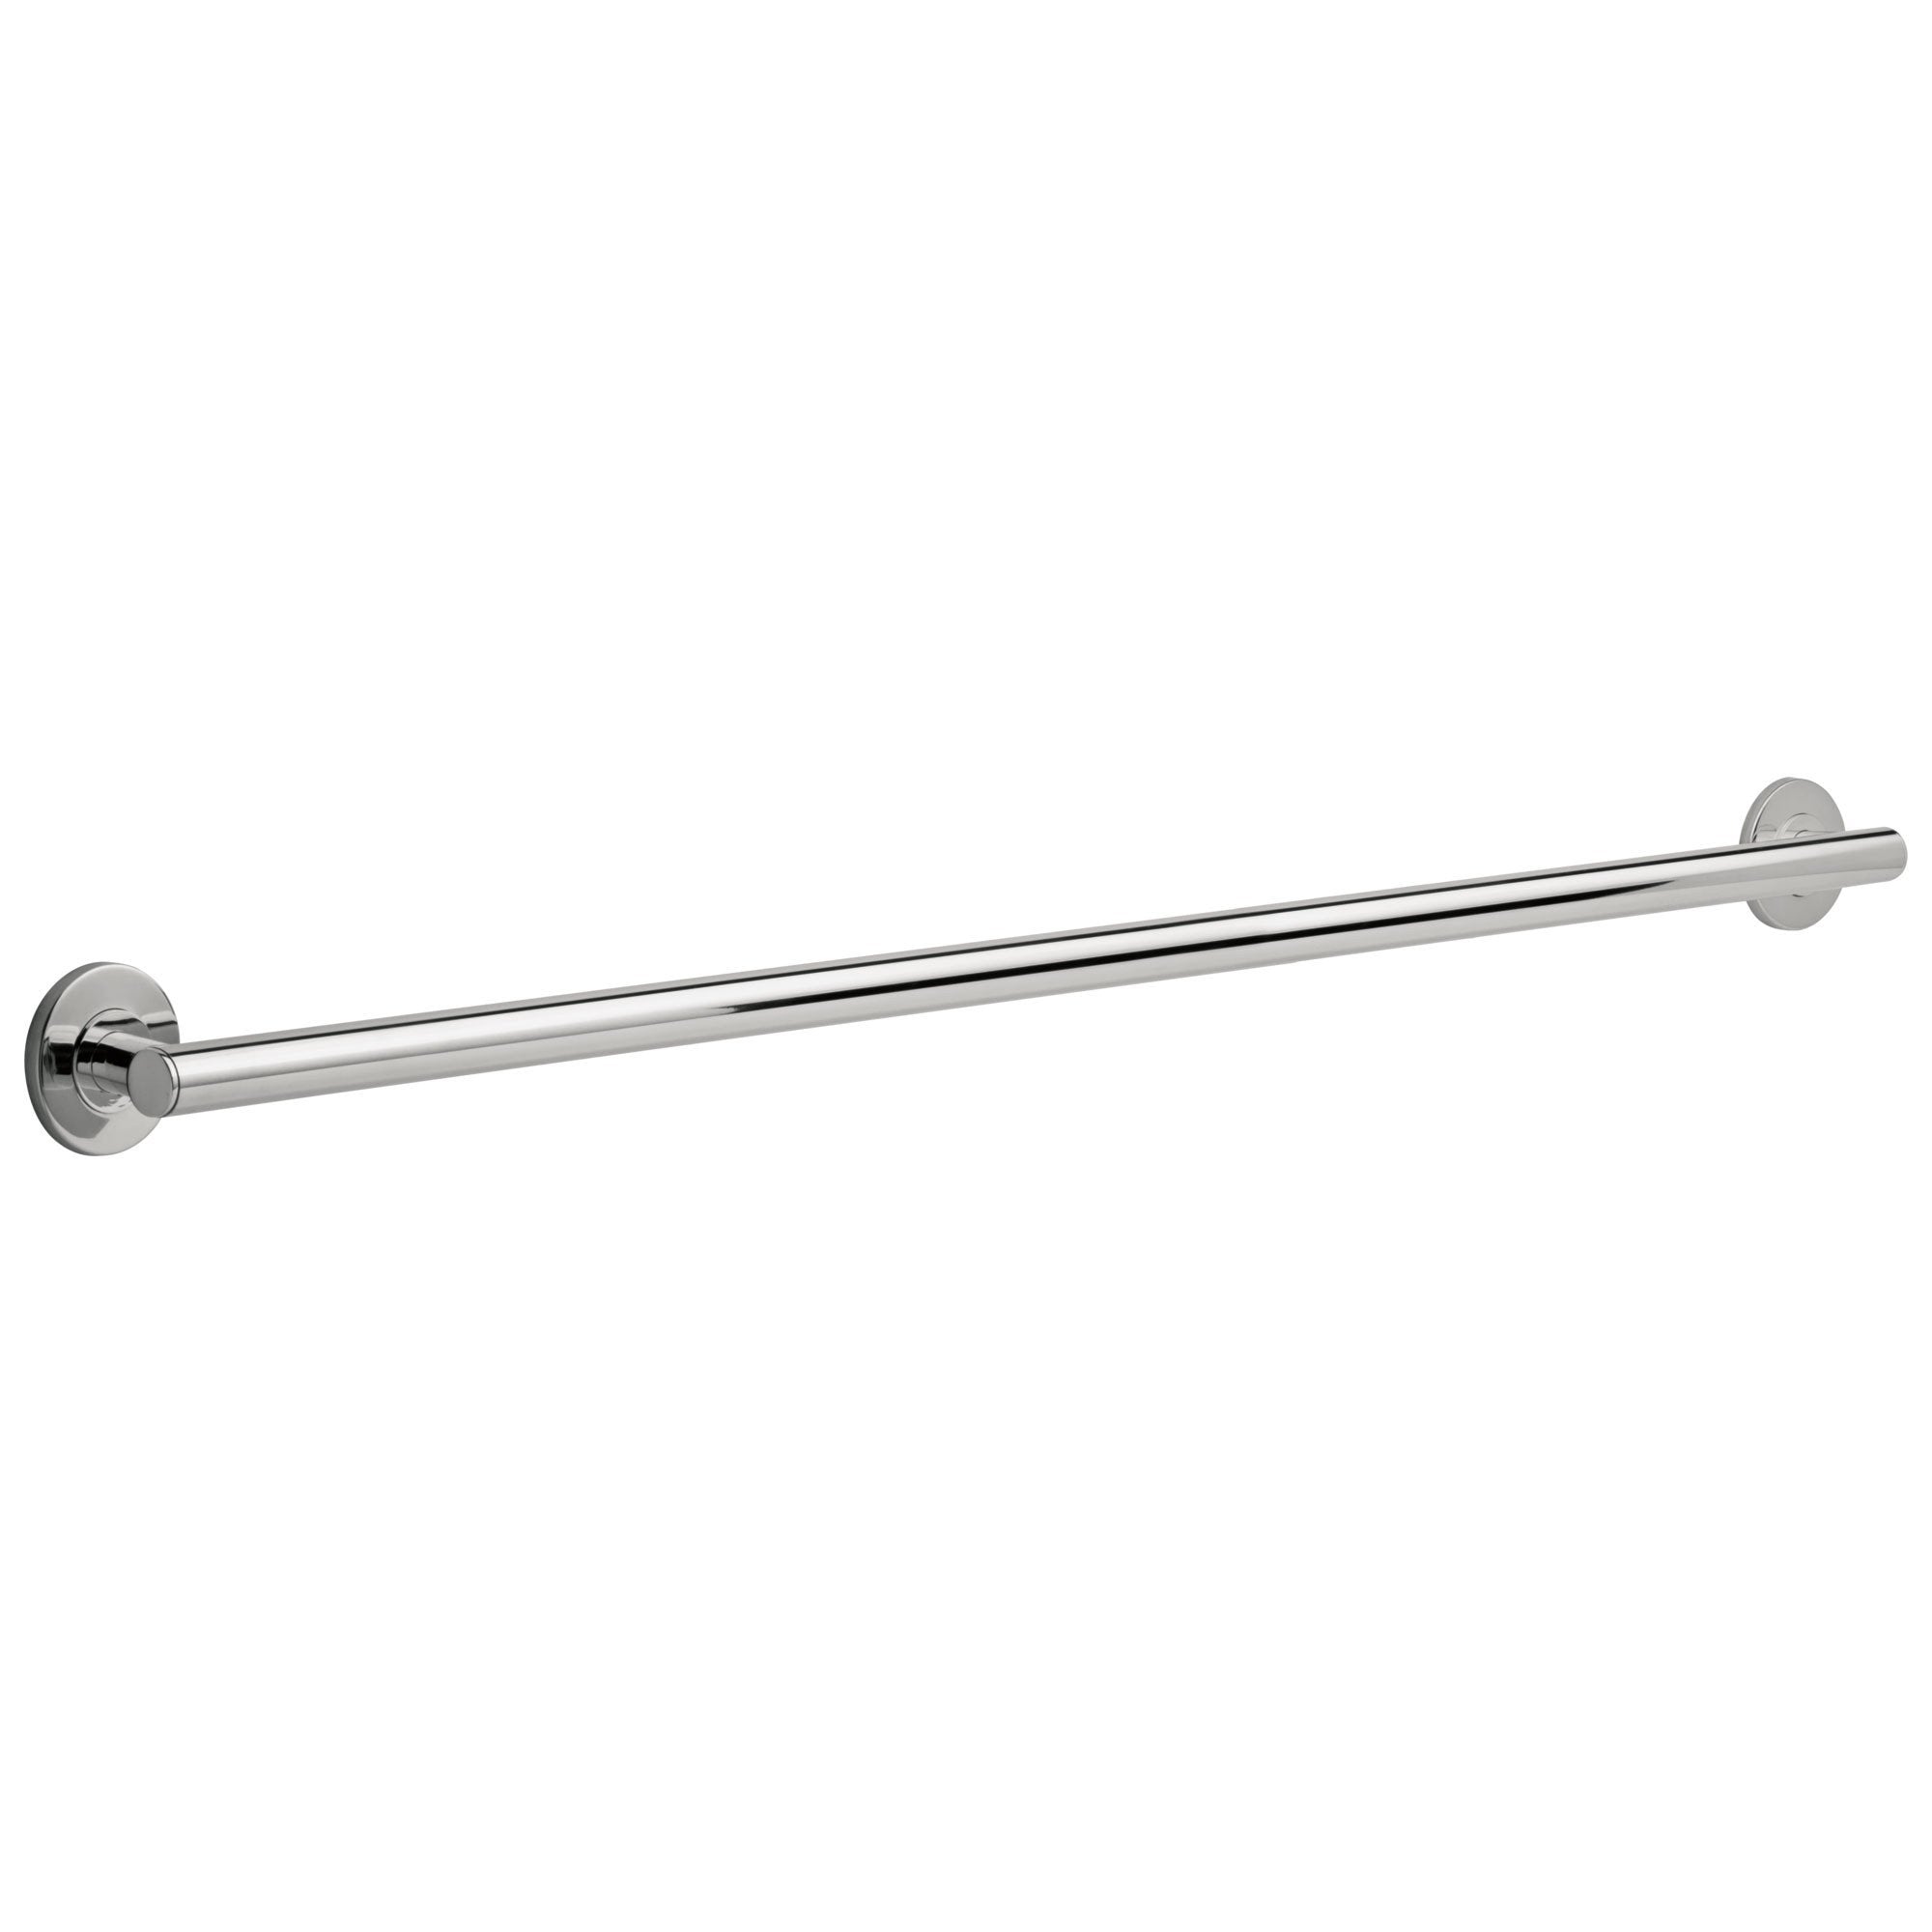 Delta Bath Safety Collection Polished Nickel Contemporary Concealed Wall Mount ADA Approved 42" Long Decorative Bathroom Grab Bar / Towel Bar D41842PN